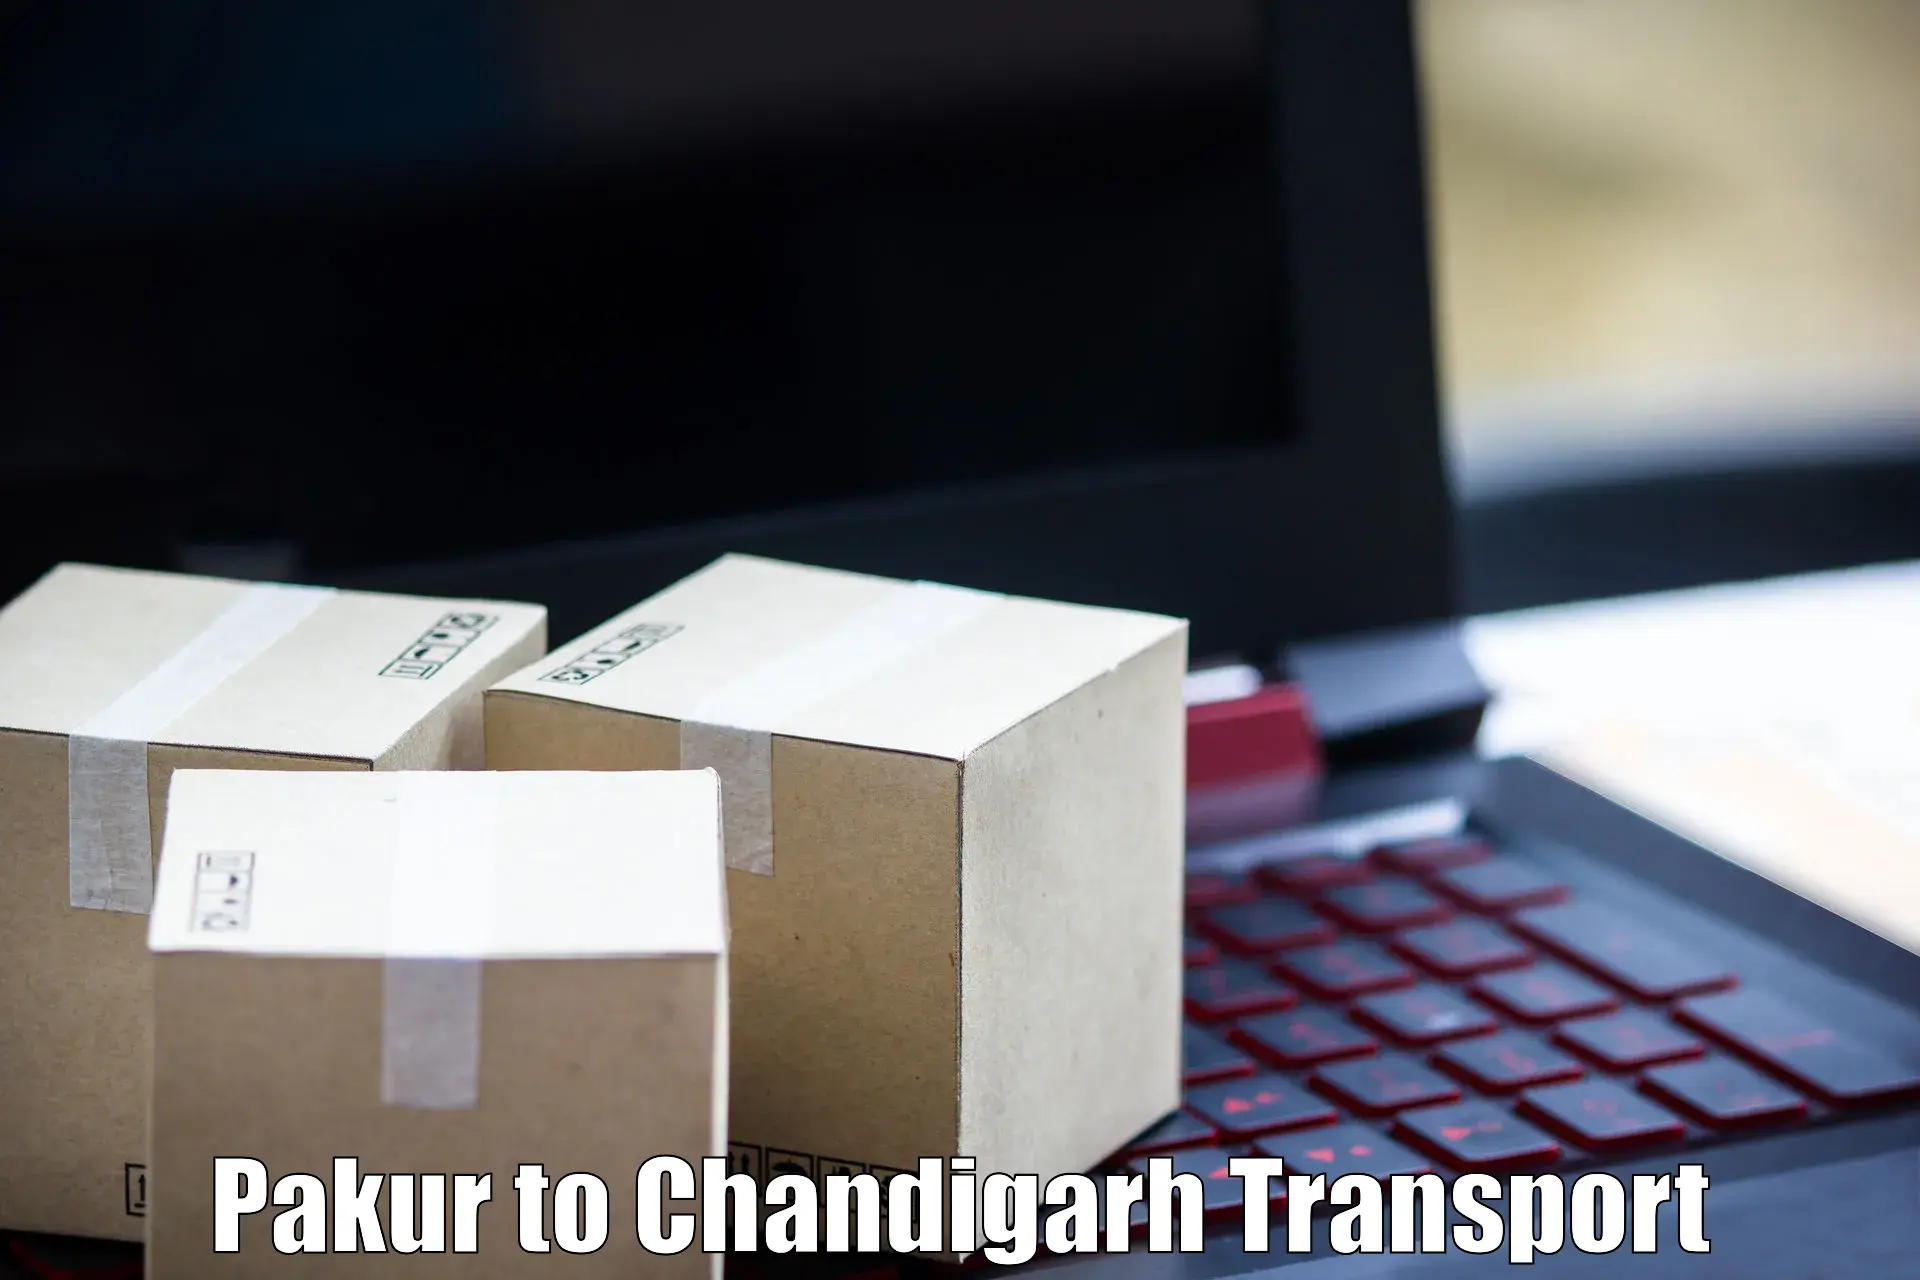 Container transport service Pakur to Chandigarh